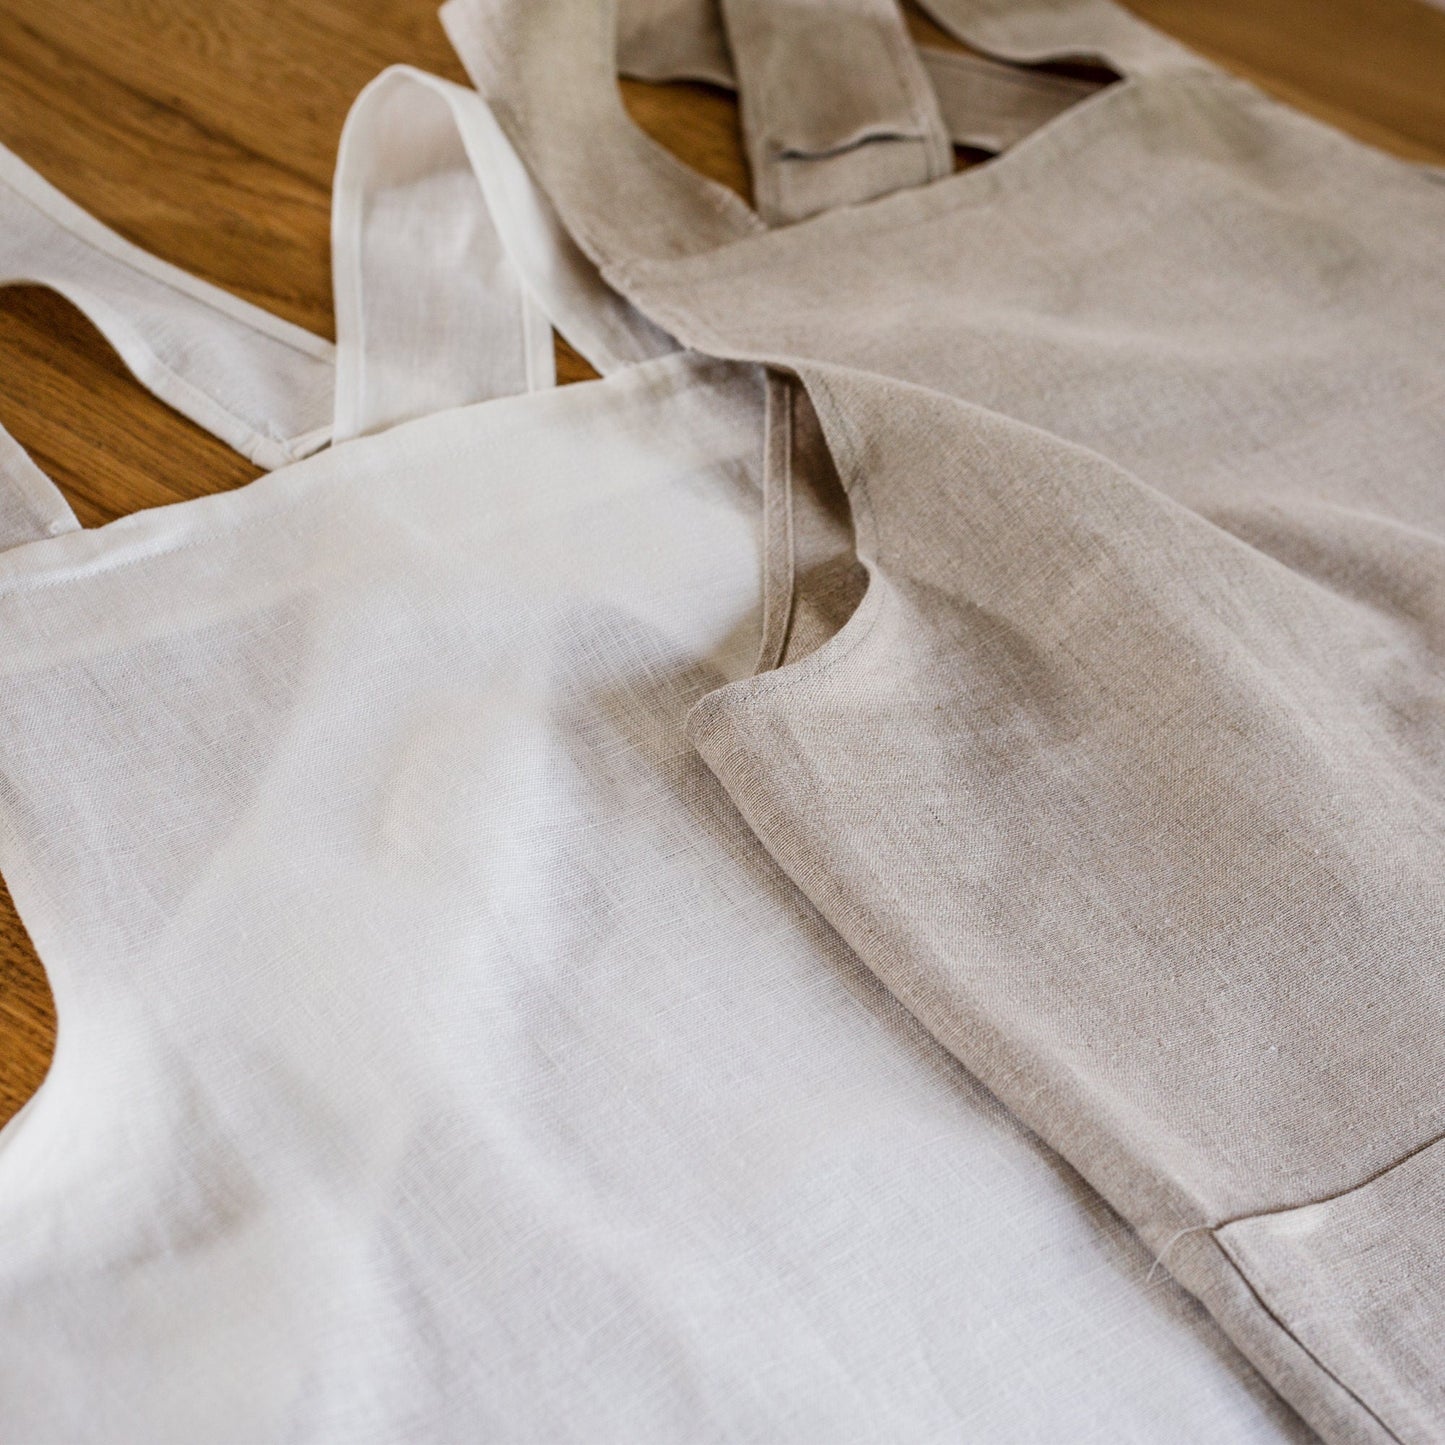 Load image into Gallery viewer, Linen Pinafore Apron | Cross Back Linen Apron | Japanese Style Apron | No Ties Linen Apron | Long Linen Apron | No Ties Apron | Linen Apron
